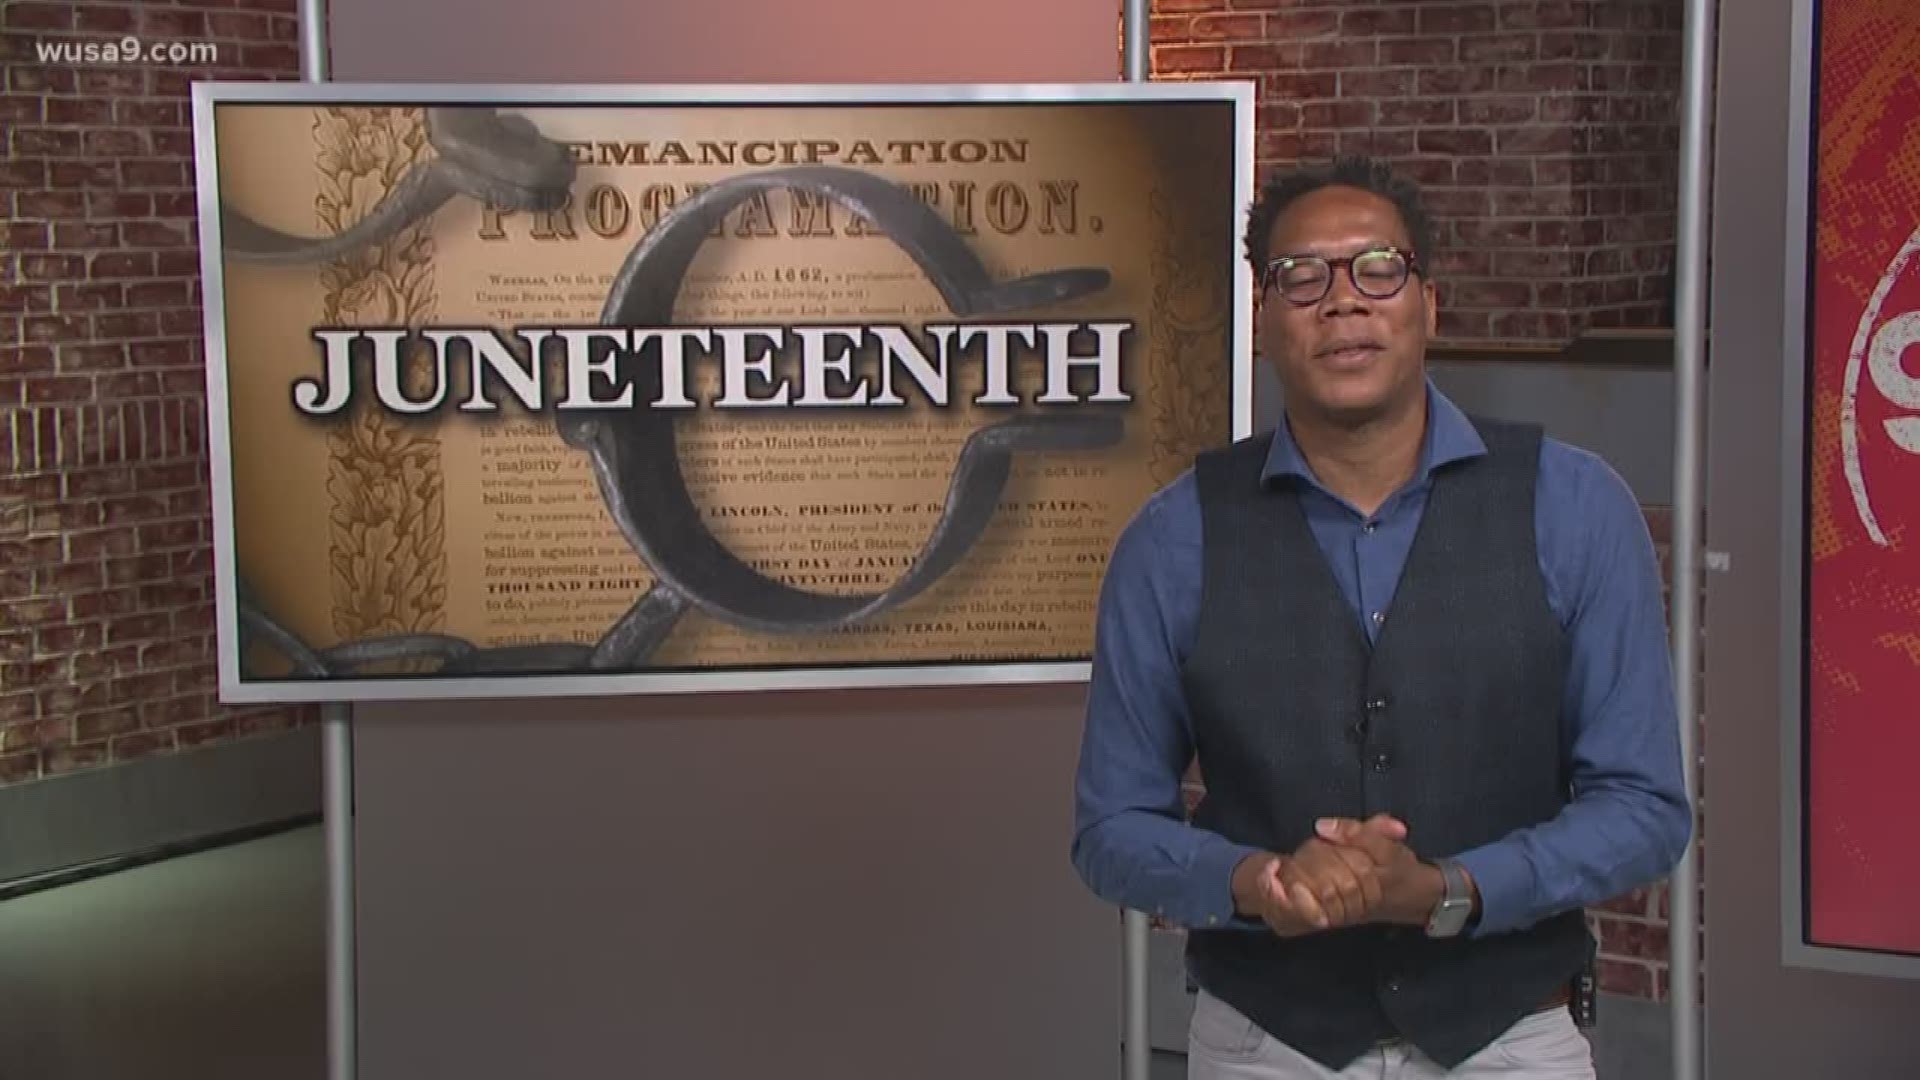 Every year on June 19th, people come together to celebrate Juneteenth, the official holiday commemorating the end of slavery in the United States. The term Juneteenth is a combination of "June" and "nineteenth." 
Juneteenth is recognized as a holiday in 45 states as well as the District of Columbia.